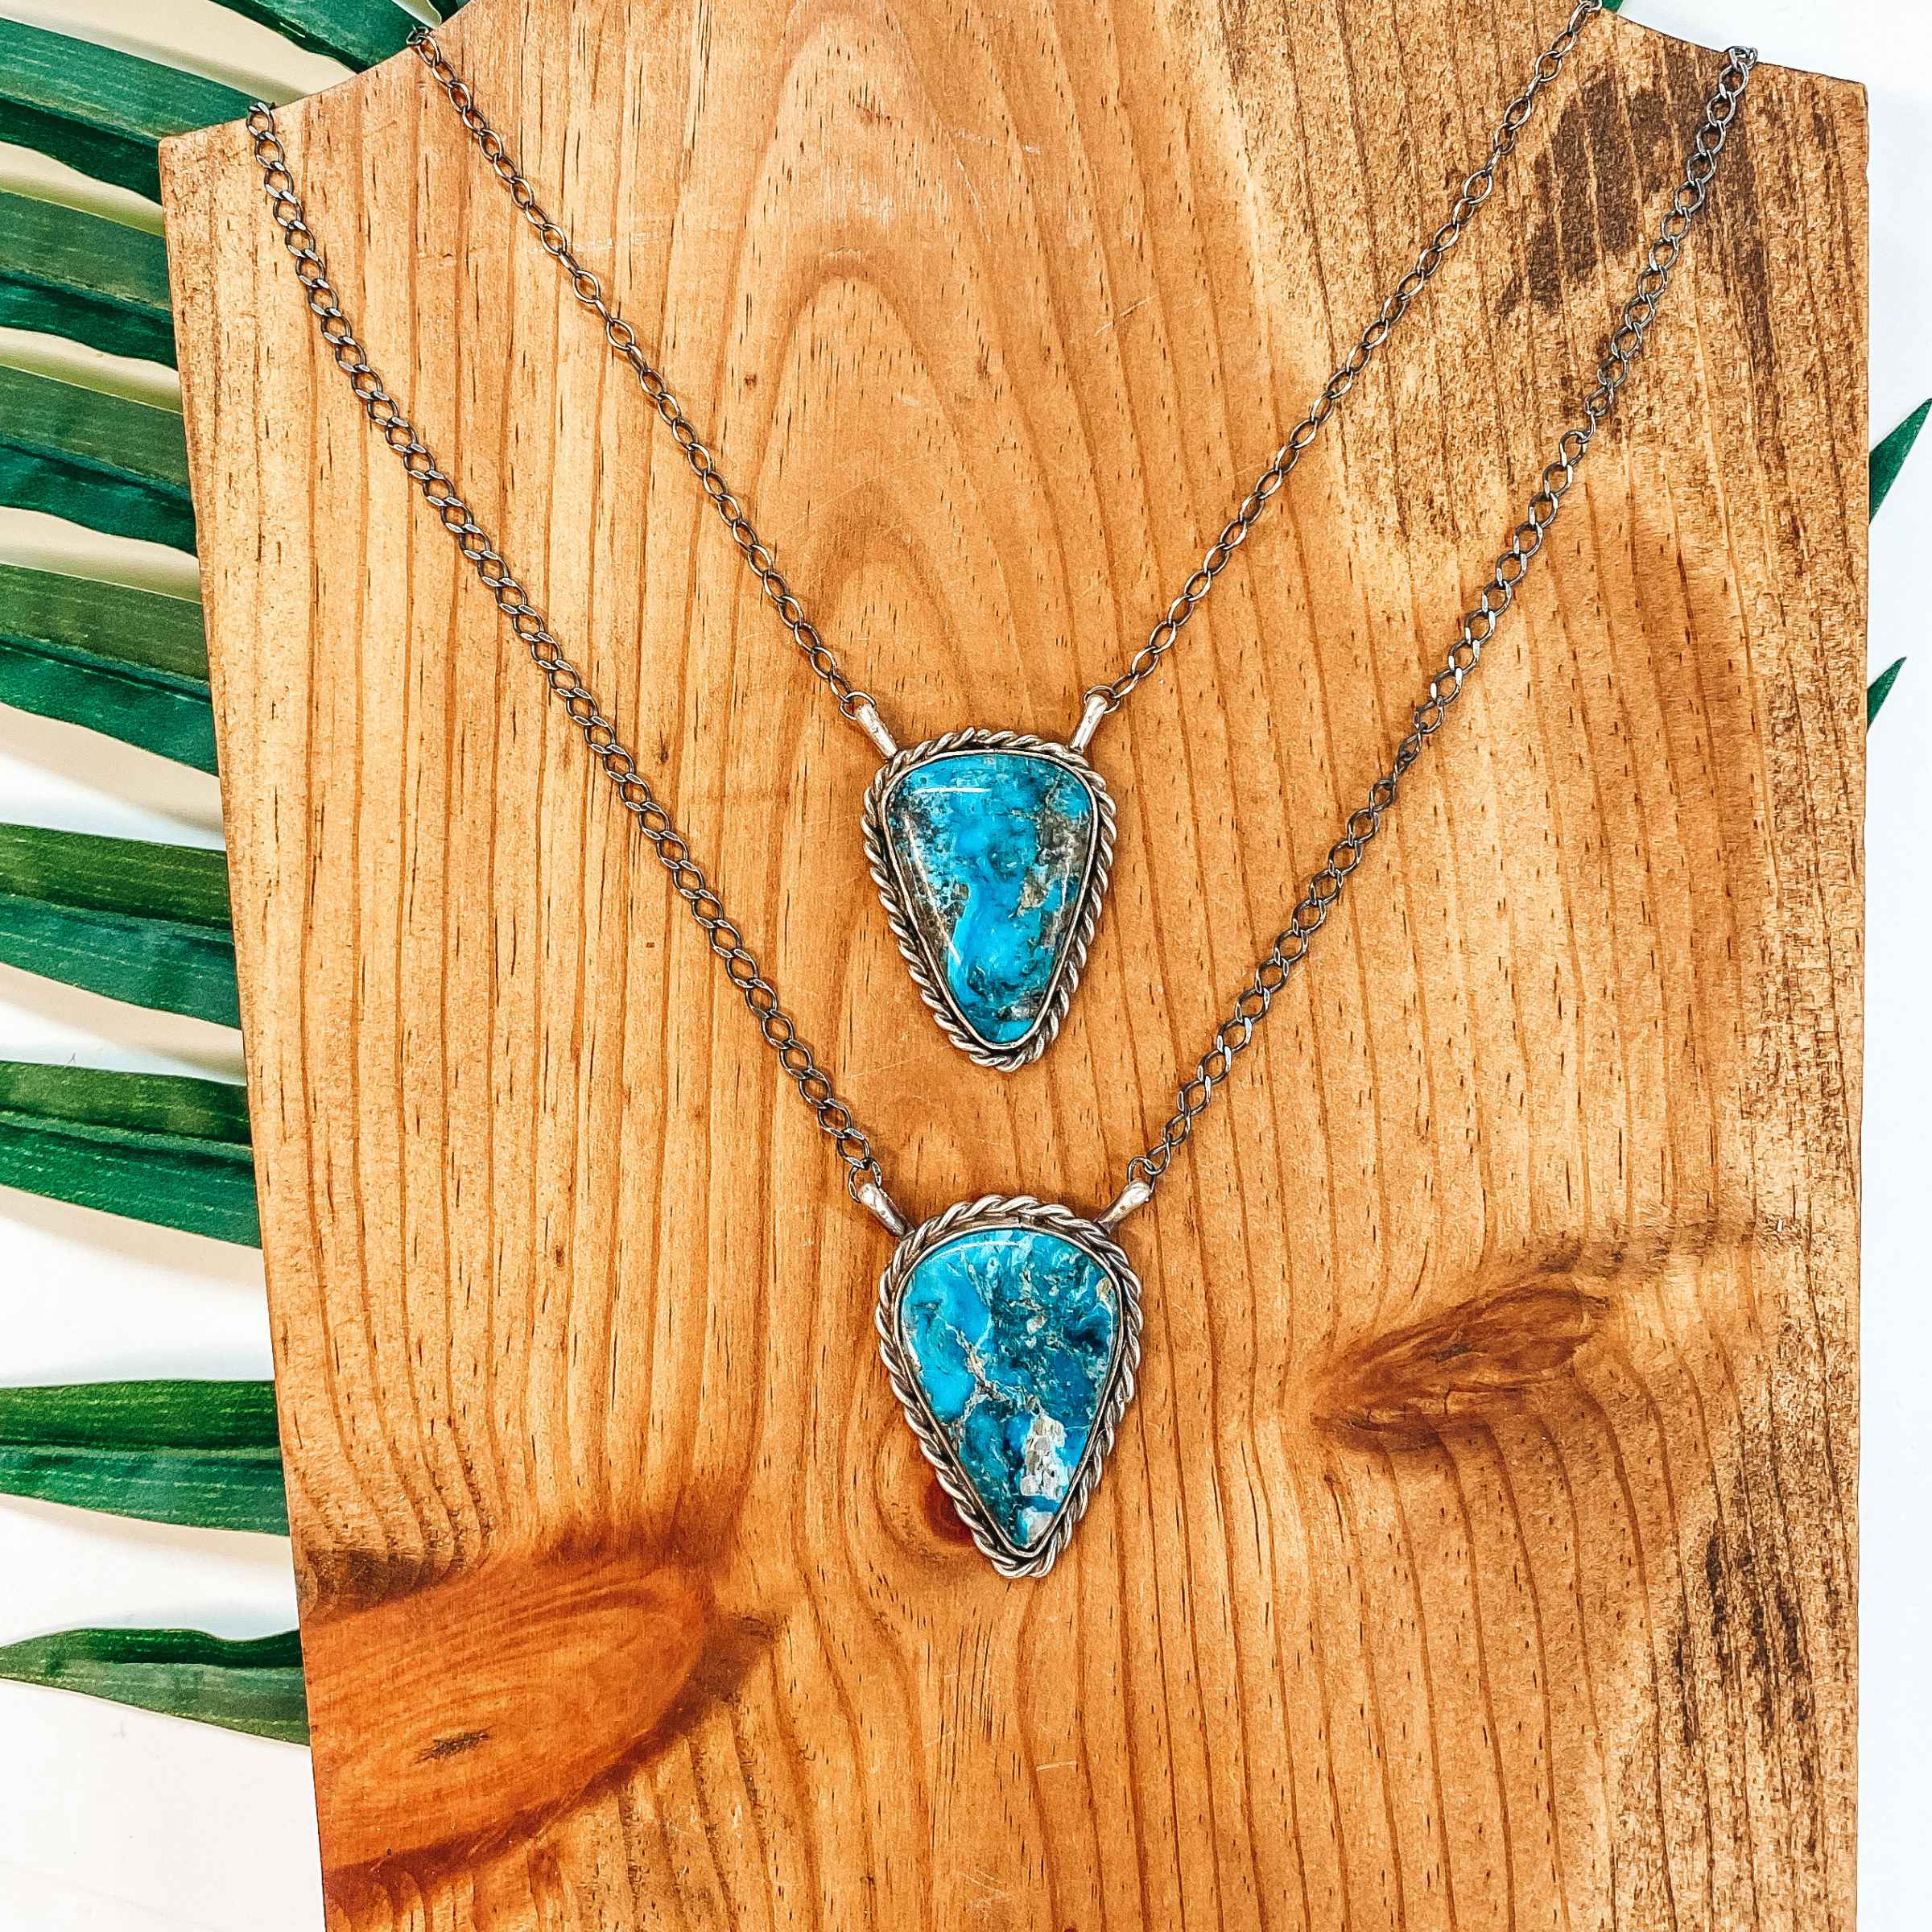 Merle House | Navajo Handmade Sterling Silver Necklace with Kingman Turquoise Triangle Pendant - Giddy Up Glamour Boutique